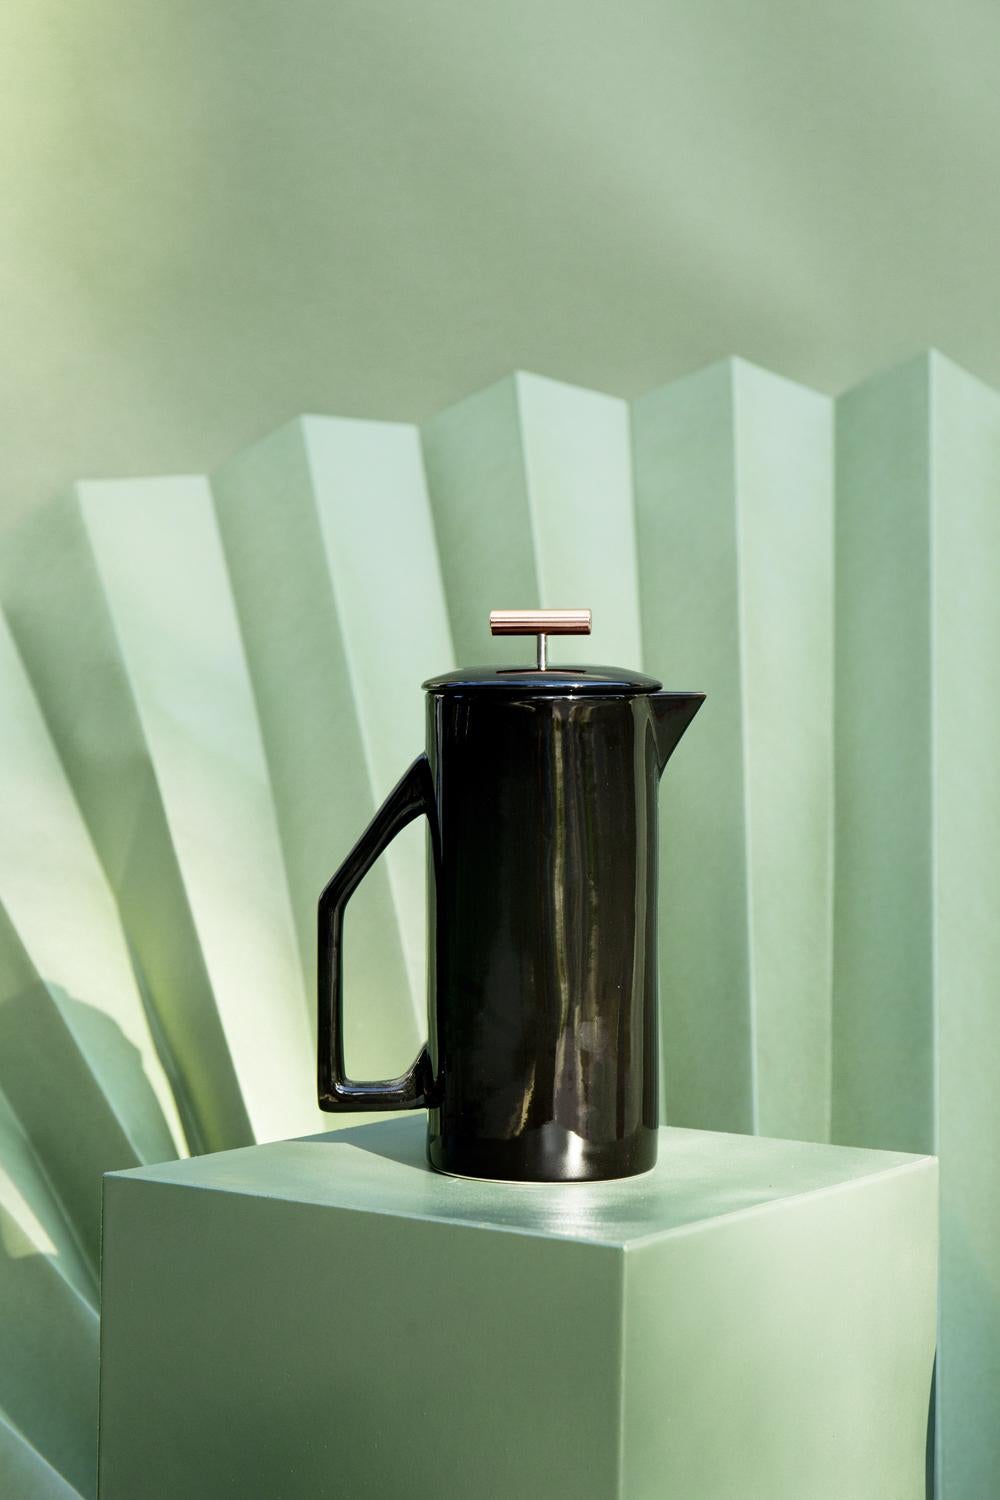 Brew perfect, full-bodied coffee in the traditional French press method. This heavy walled ceramic press pot is a functional and beautiful addition to your kitchen table. The ceramic body maintains a consistent temperature throughout the brewing